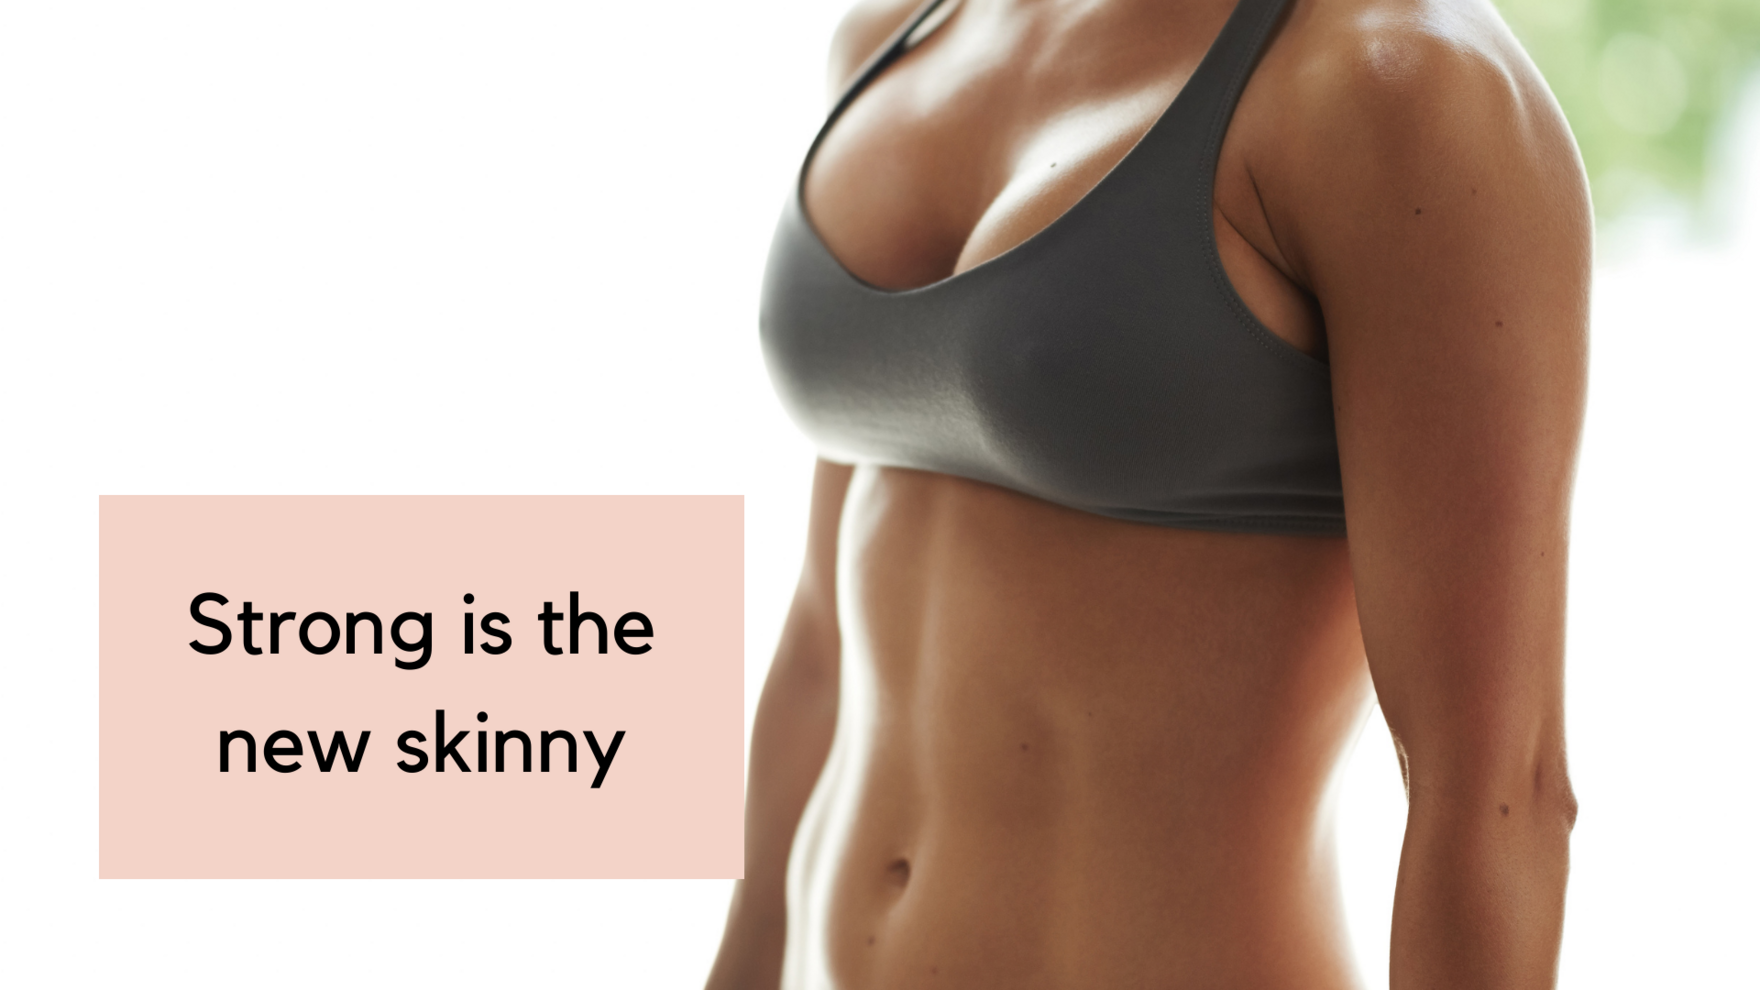 Strong is the new skinny